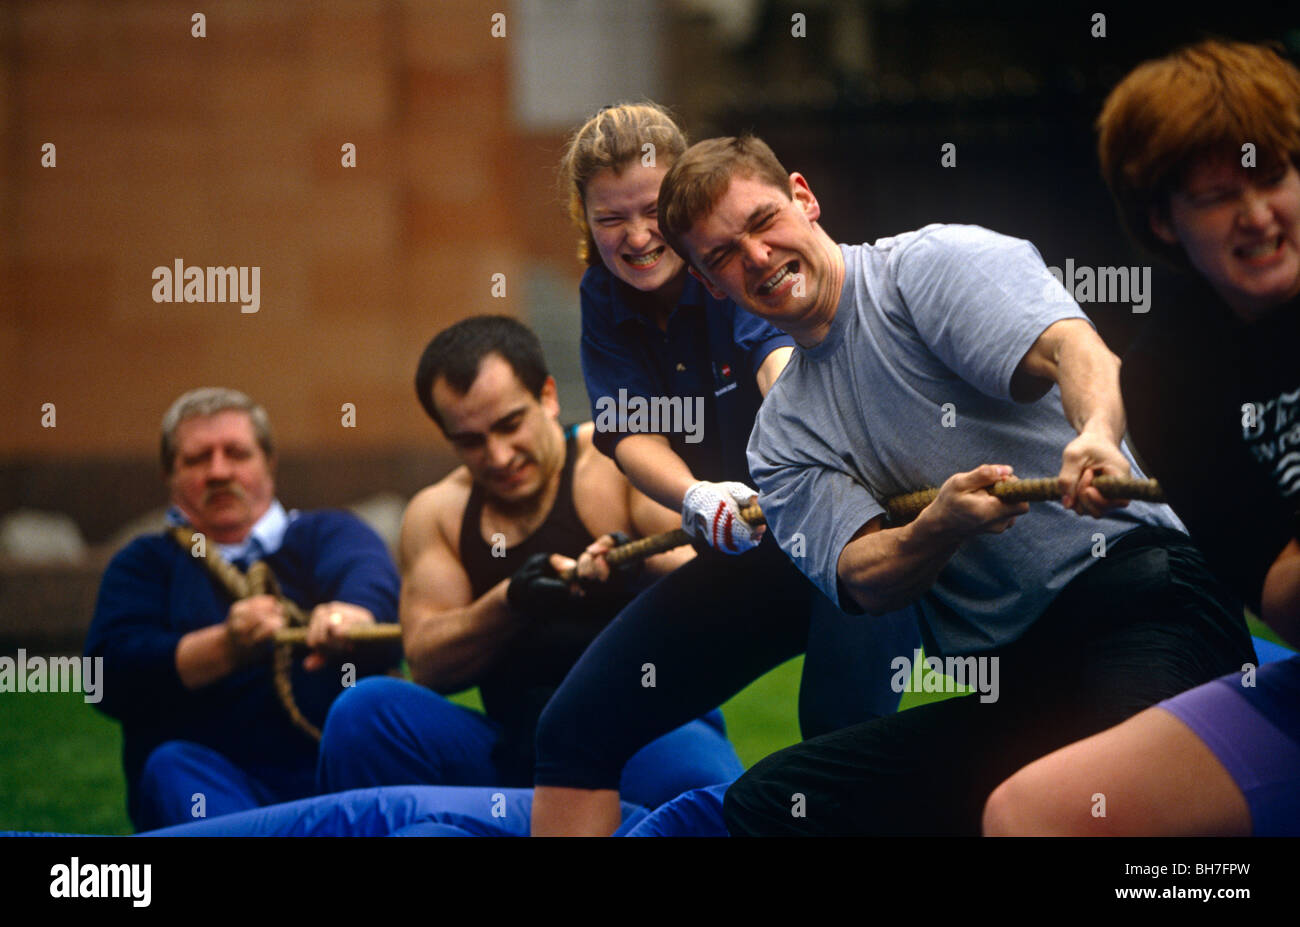 A tug of war team grit their teeth while having fun during a gym's lunchtime promotion in Broadgate. Stock Photo